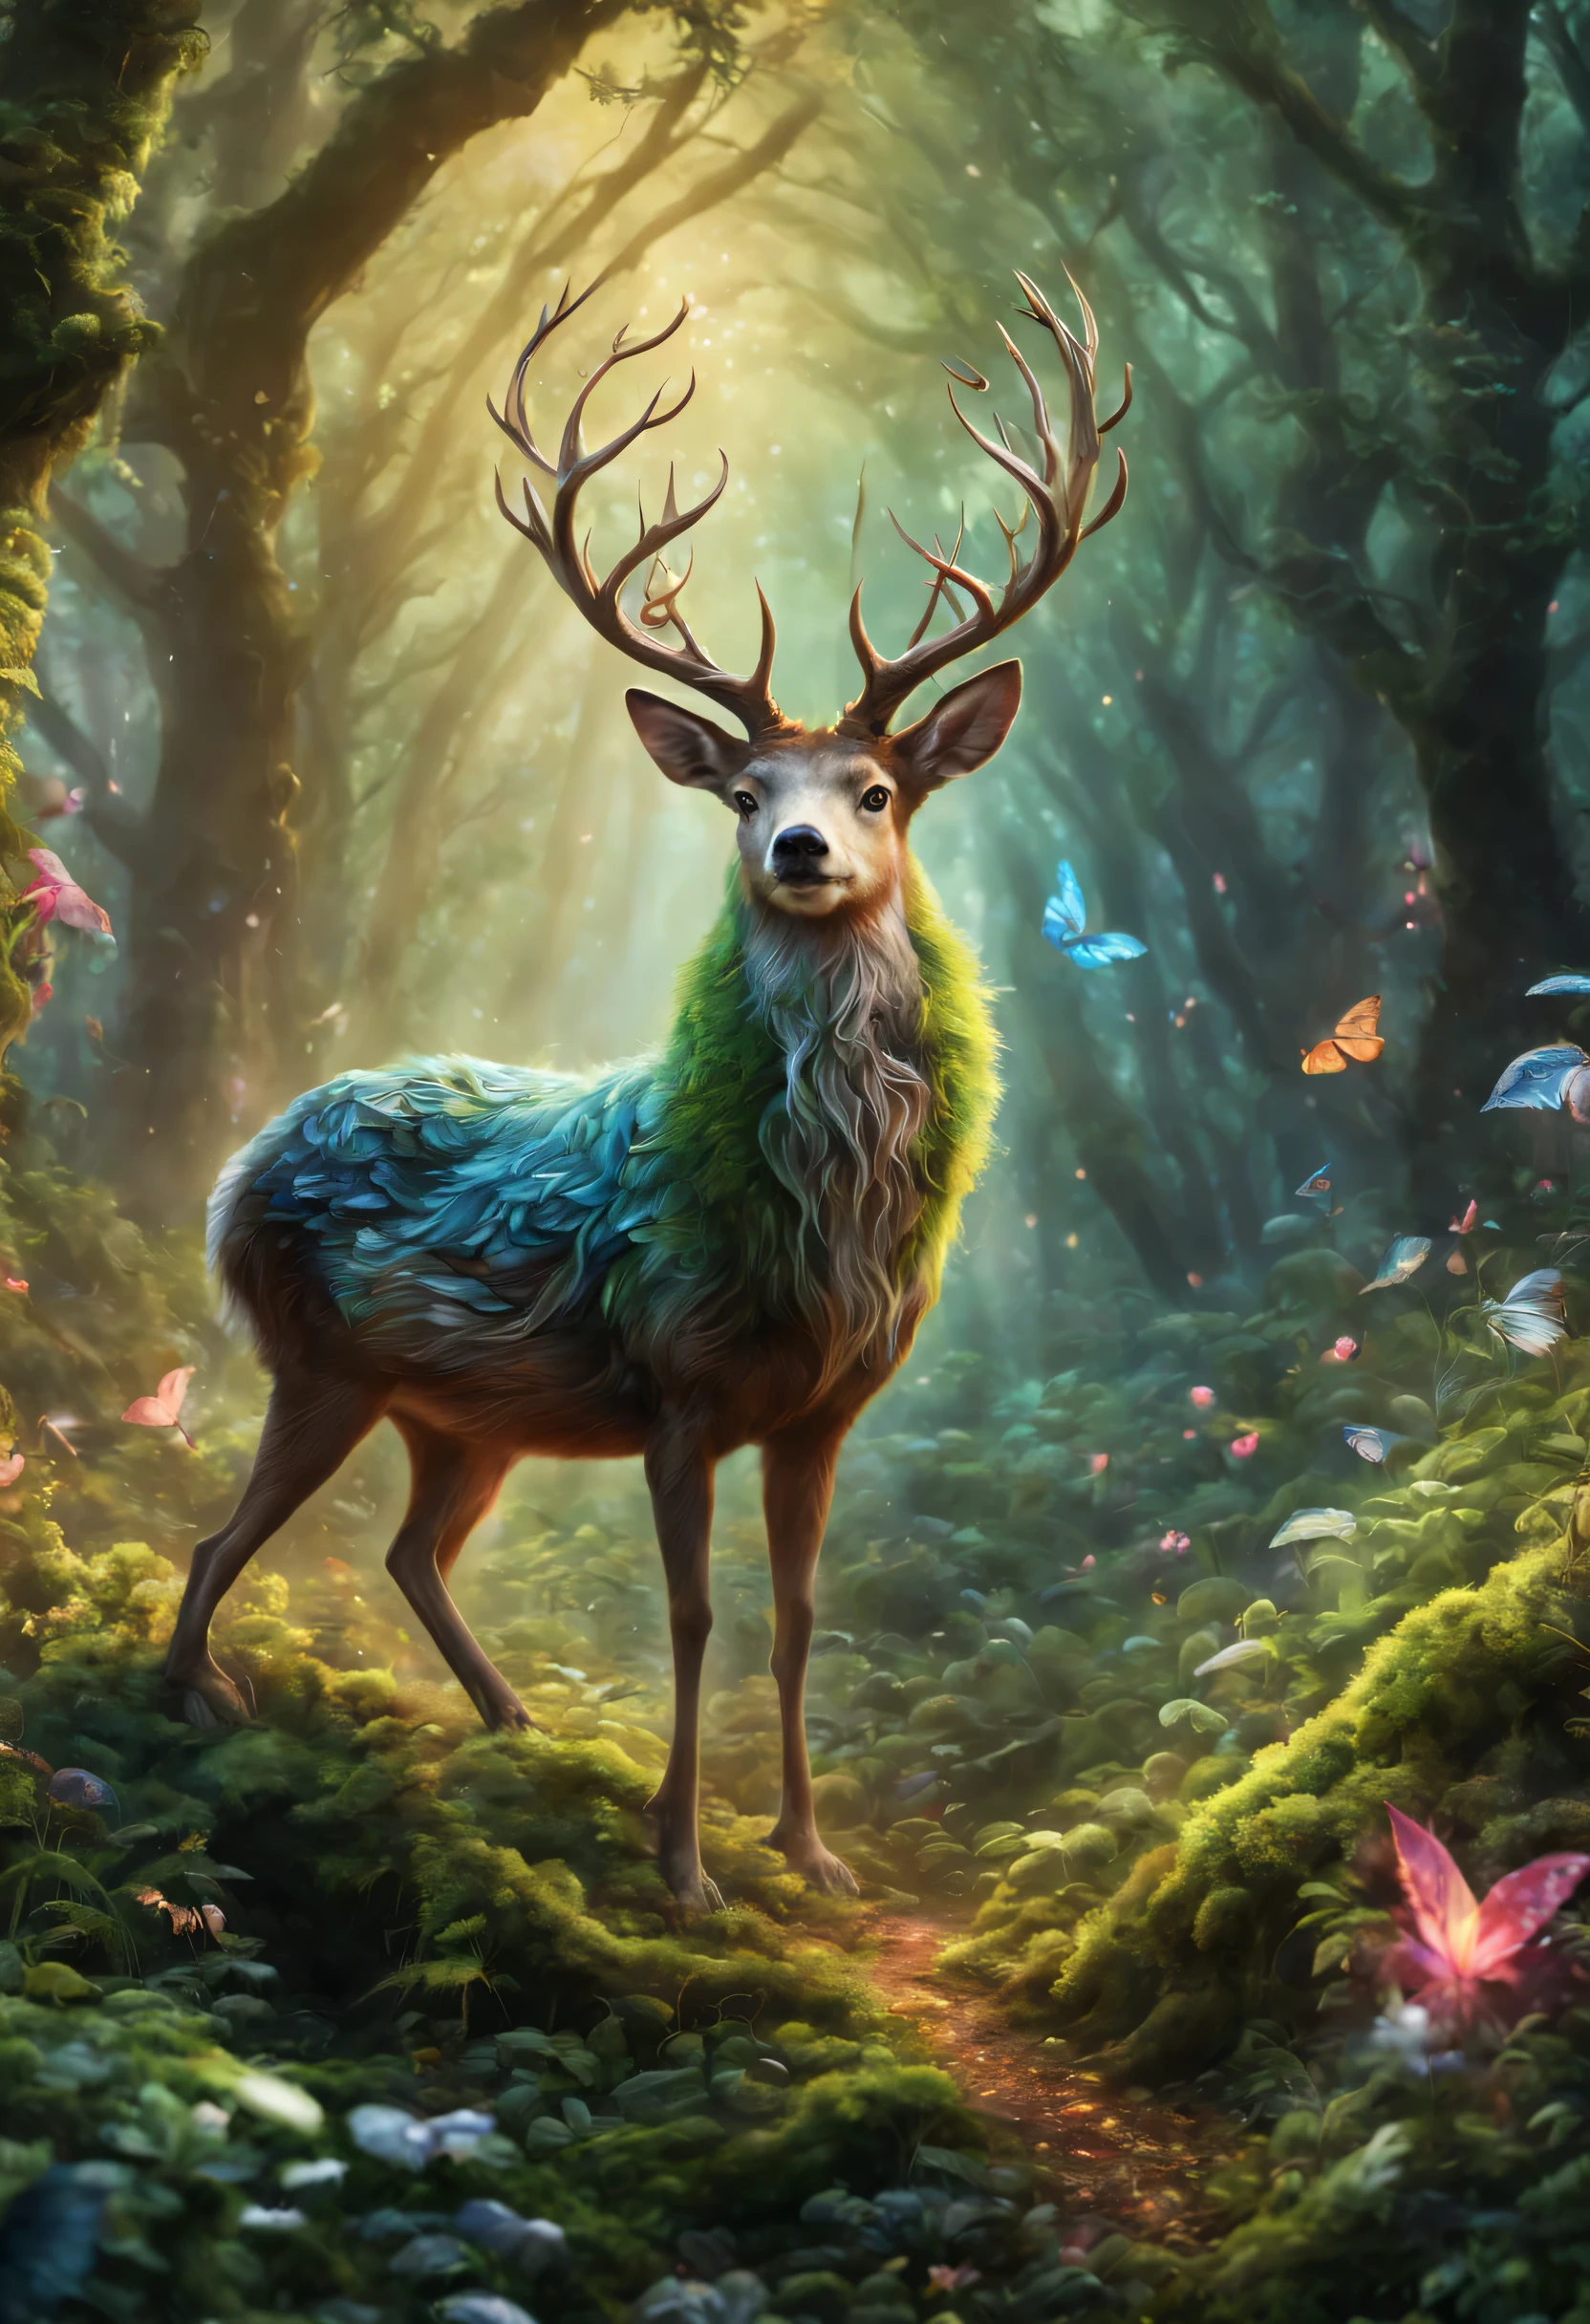 A mysterious enchanted forest, Fantastic animals living in the forest, Fantasy animals, magical world, mysterious creature, Bizarre creatures, Fantasy colors, enchanted forest, Fantasy elements, Fantasy elements, The forest is full of magic, It gives a sense of mystery、dreamy feeling, Charm Aura, (best quality,4K,8k,high resolution,masterpiece:1.2), Super detailed, (actual,photoactual,photo-actual:1.37), enchanted woodland, magical residents, mysterious flora and fauna, Vibrant and whimsical colors, charming elements, Atmospheric magic, fantastic forest scene, surreal environment, Strong sense of surprise and mystery.